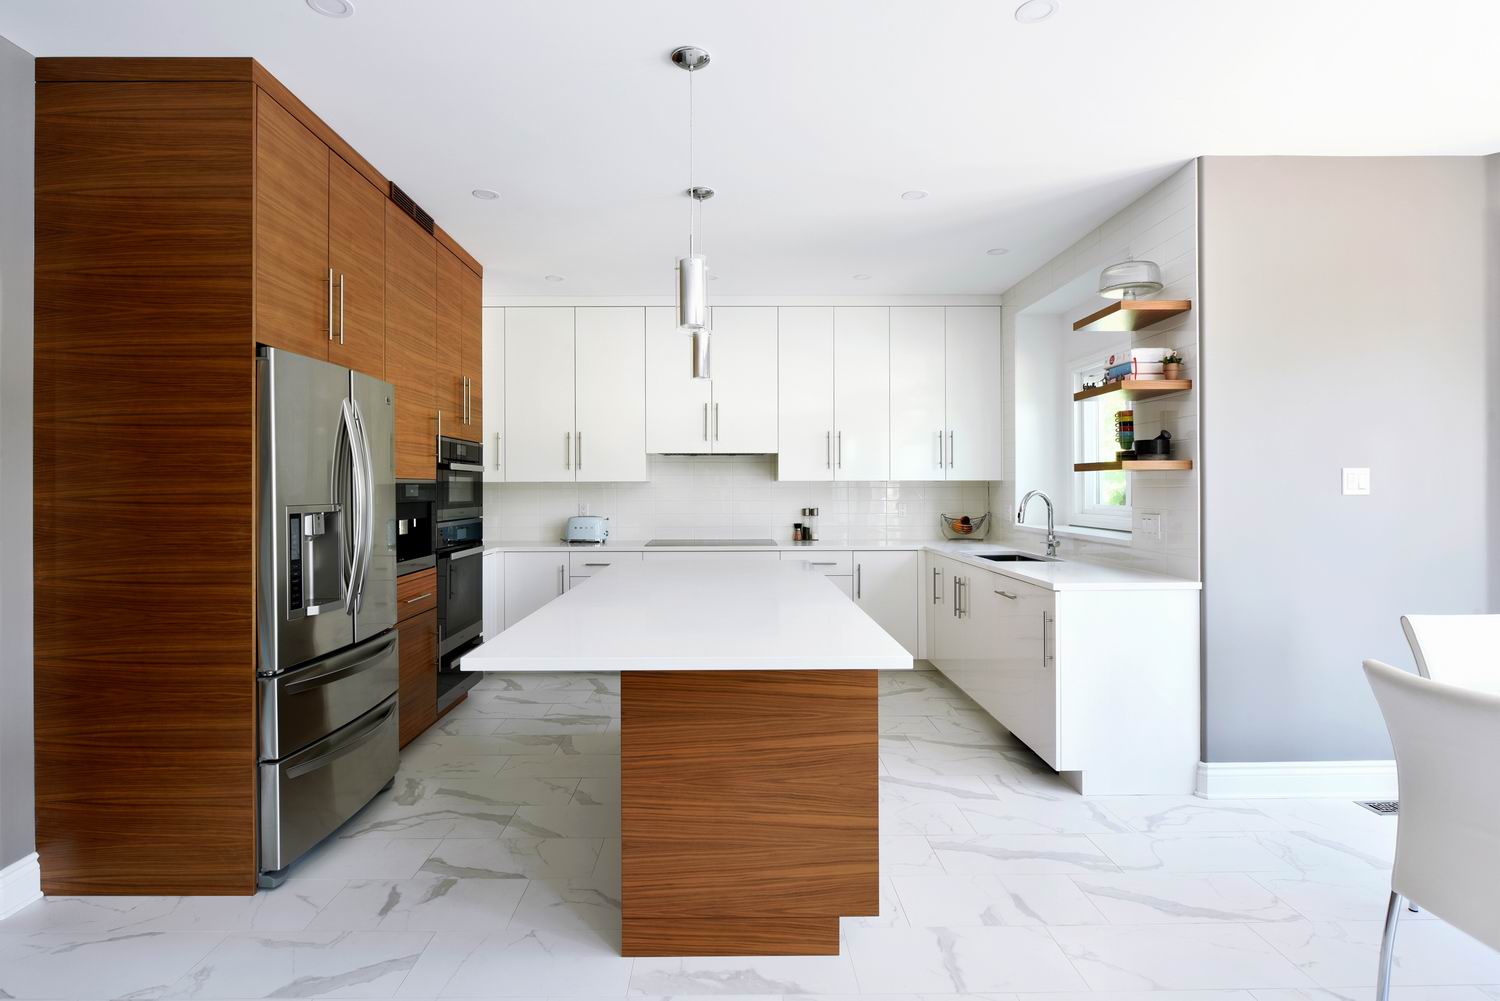 two-tone contemporary kitchen in white and walnut Amsted Design-Build Ottawa renovations